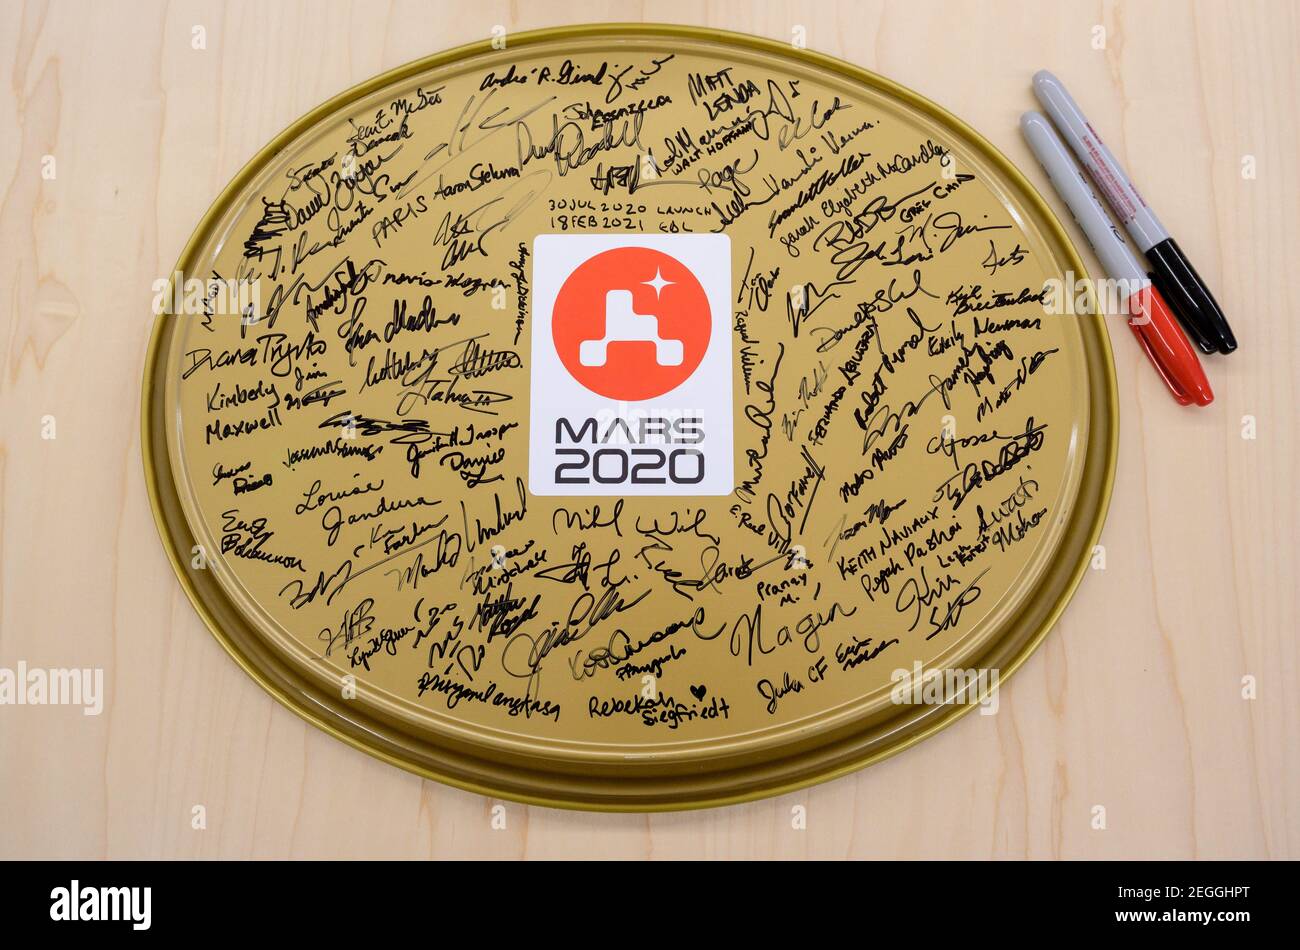 A serving tray with signatures from the NASA Perseverance Mars rover team is seen in mission control, Thursday, Feb. 18, 2021, at NASA's Jet Propulsion Laboratory in Pasadena, California. A key objective for Perseverance's mission on Mars is astrobiology, including the search for signs of ancient microbial life. The rover will characterize the planet's geology and past climate, pave the way for human exploration of the Red Planet, and be the first mission to collect and cache Martian rock and regolith. Photo Credit: (NASA/Bill Ingalls) Please note: Fees charged by the agency are for the agenc Stock Photo